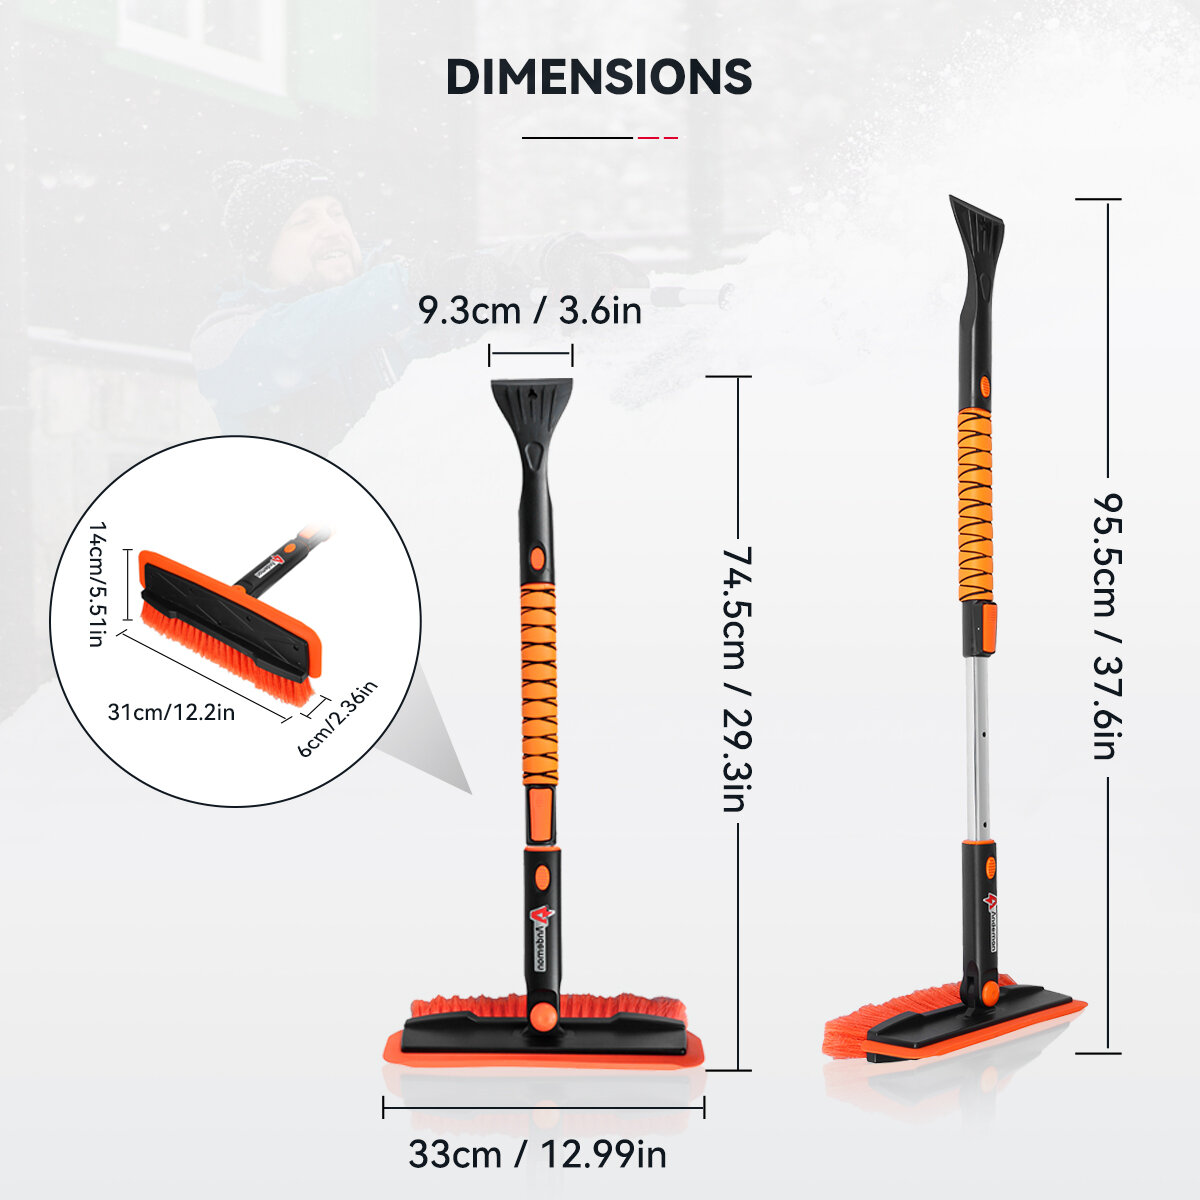 Andeman 37.6inch Ice Scraper Extendable 3 IN 1 Snow Brush Remover Shovel For Car Truck SUV